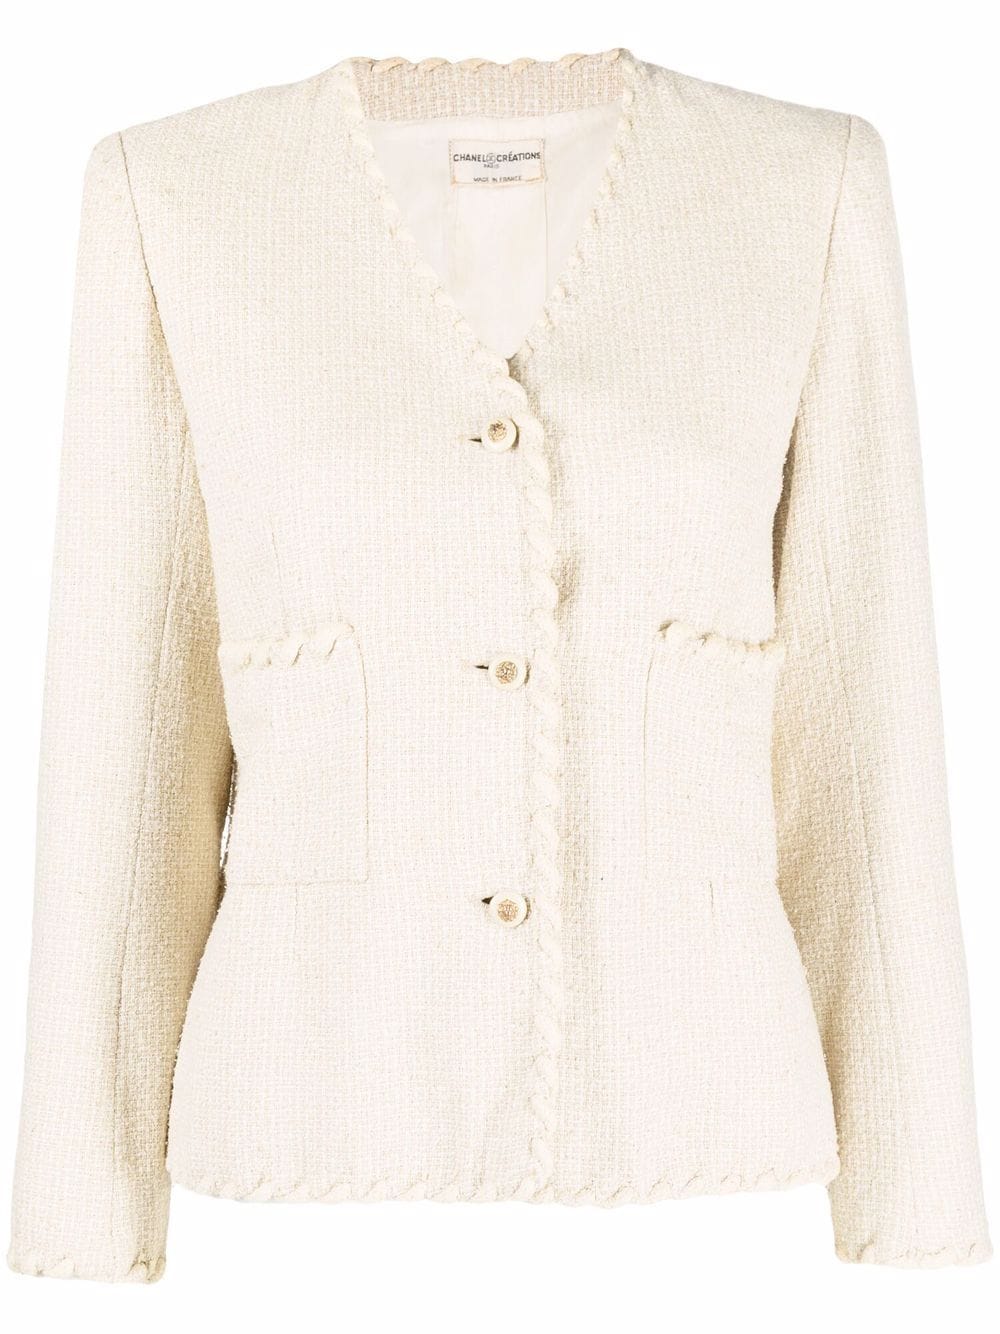 CHANEL Pre-Owned 1970s single-breasted Tweed Jacket - Farfetch